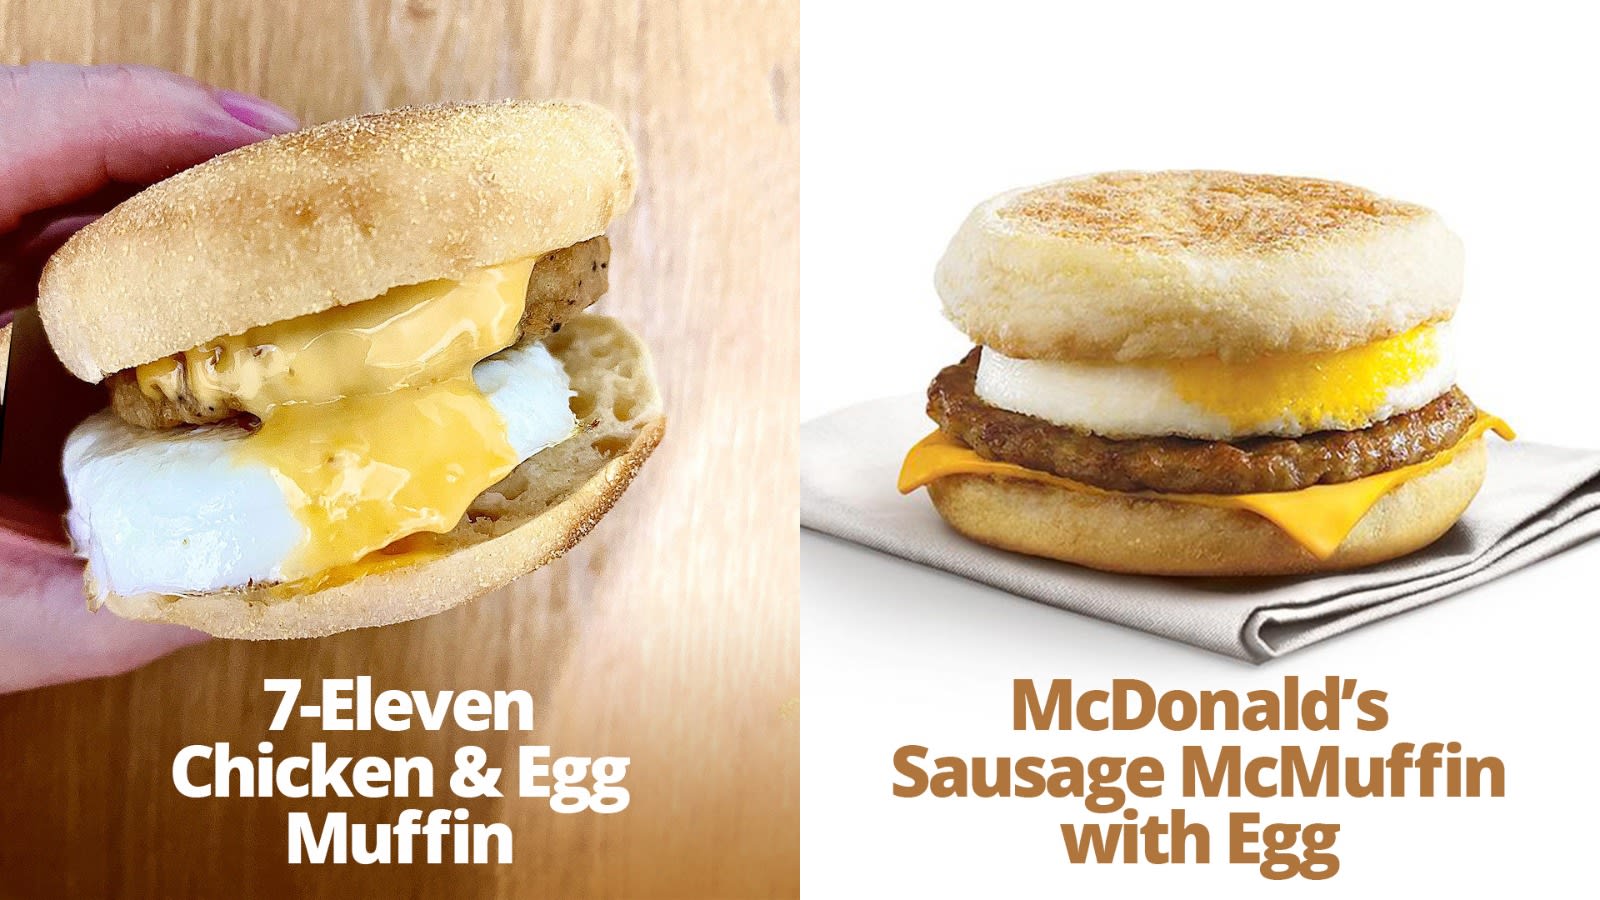 7-Eleven Sells $2.90 Chicken & Egg Muffin That’s Almost Exactly Like A McMuffin